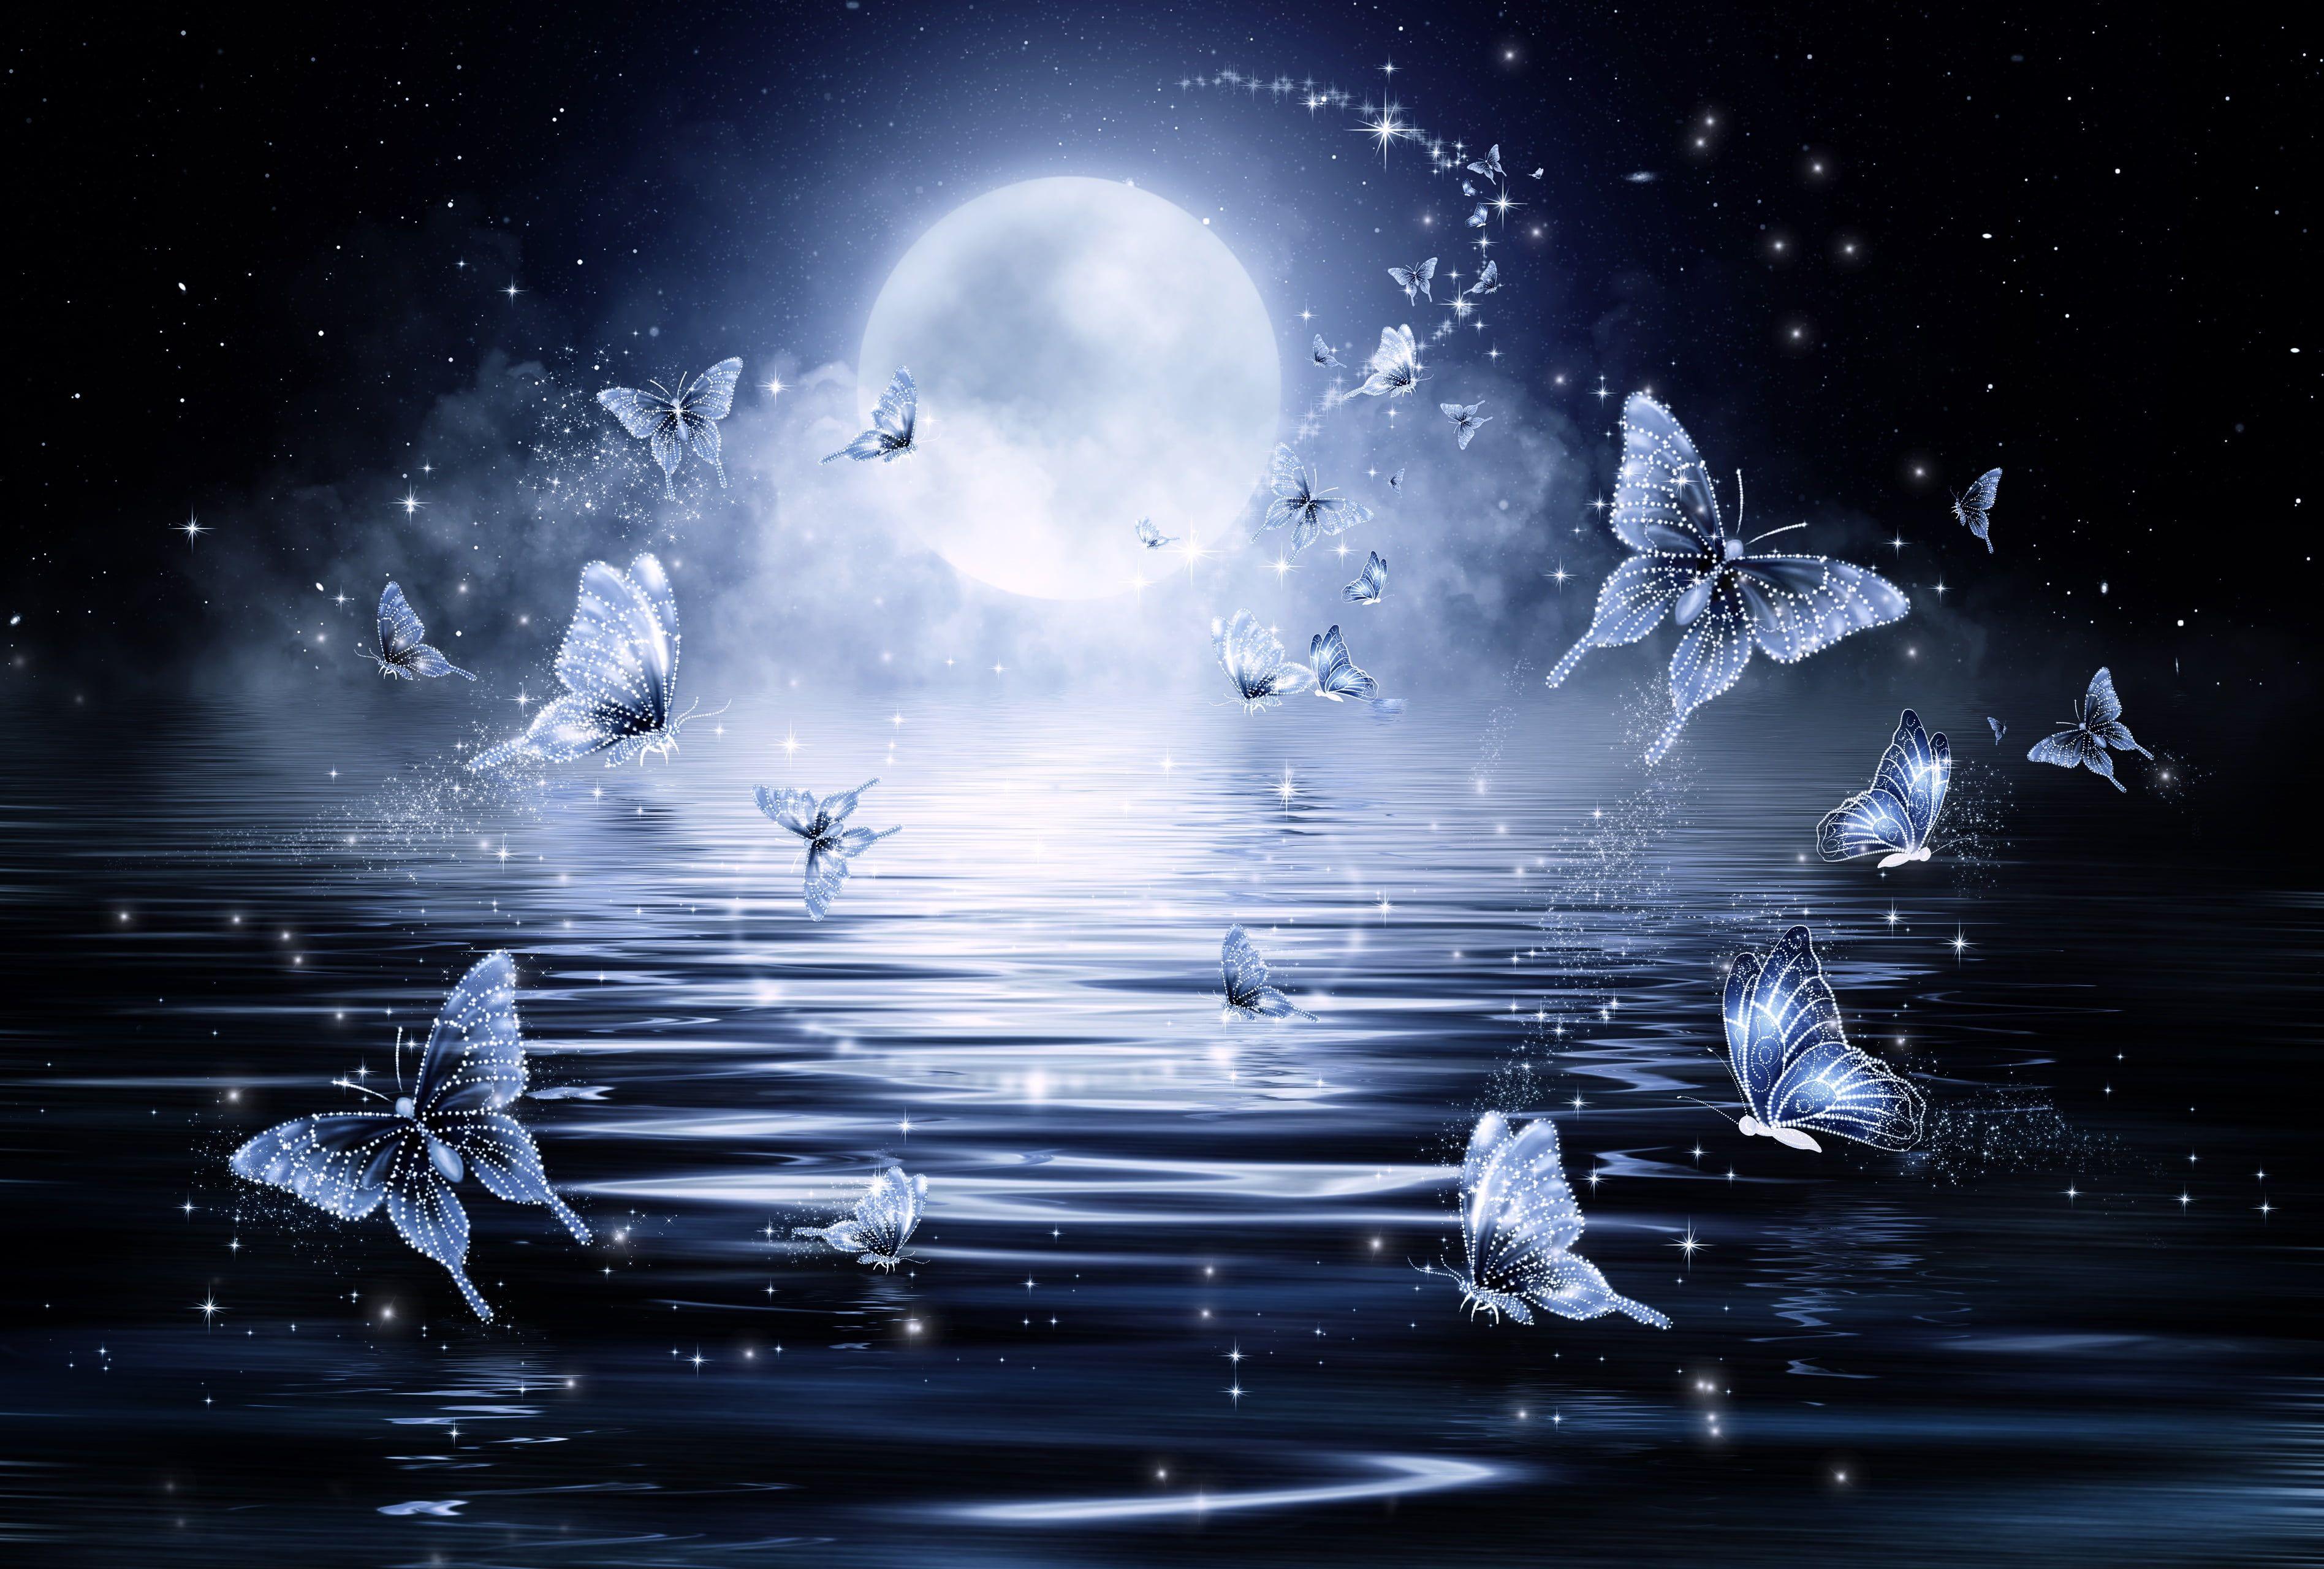 Photo of butterfly flying near body of water during full moon night time HD wallpaper